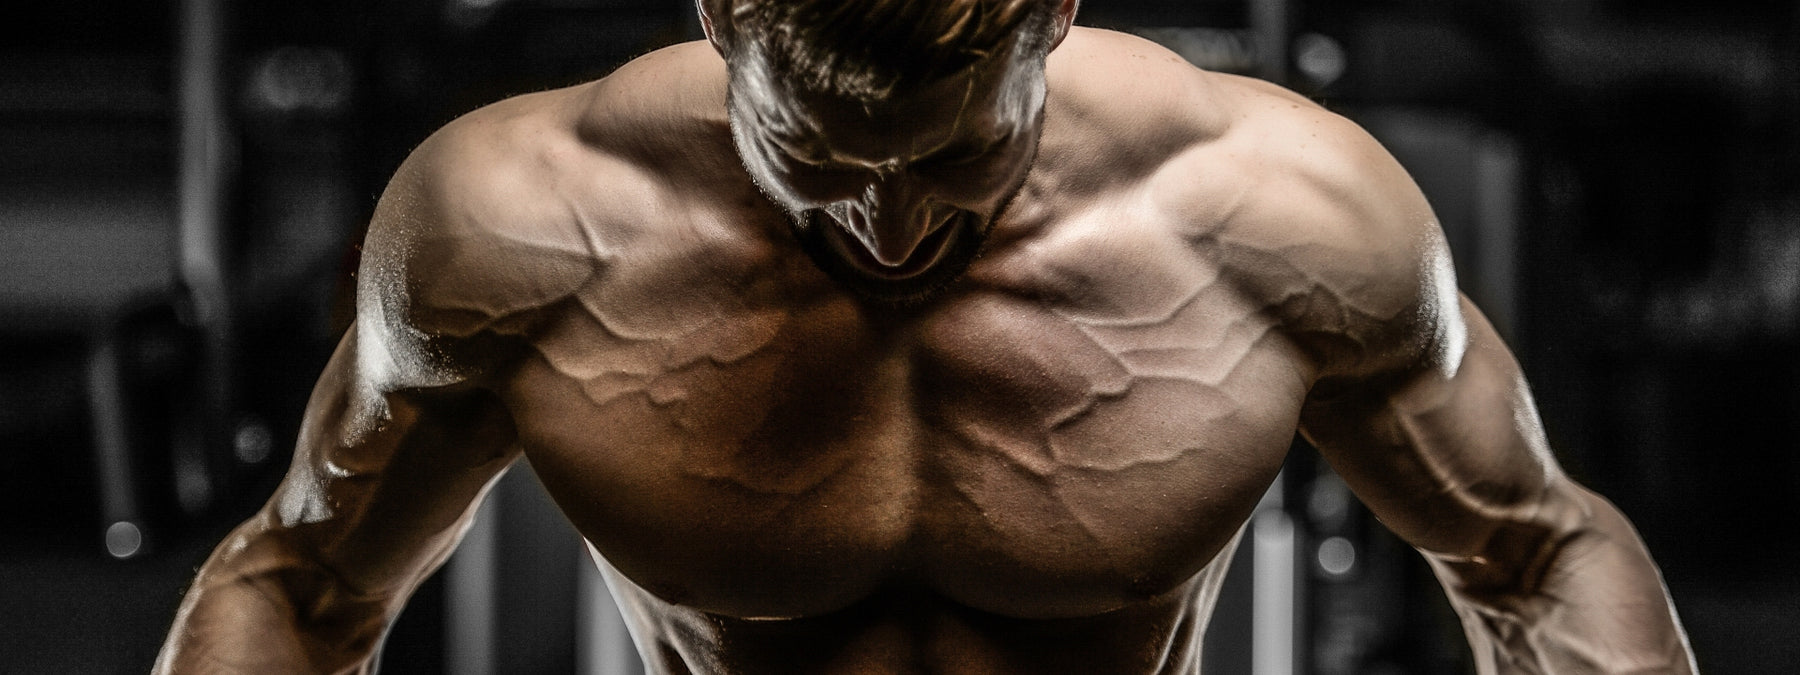 6 Chest Growth Exercises You Need to Try